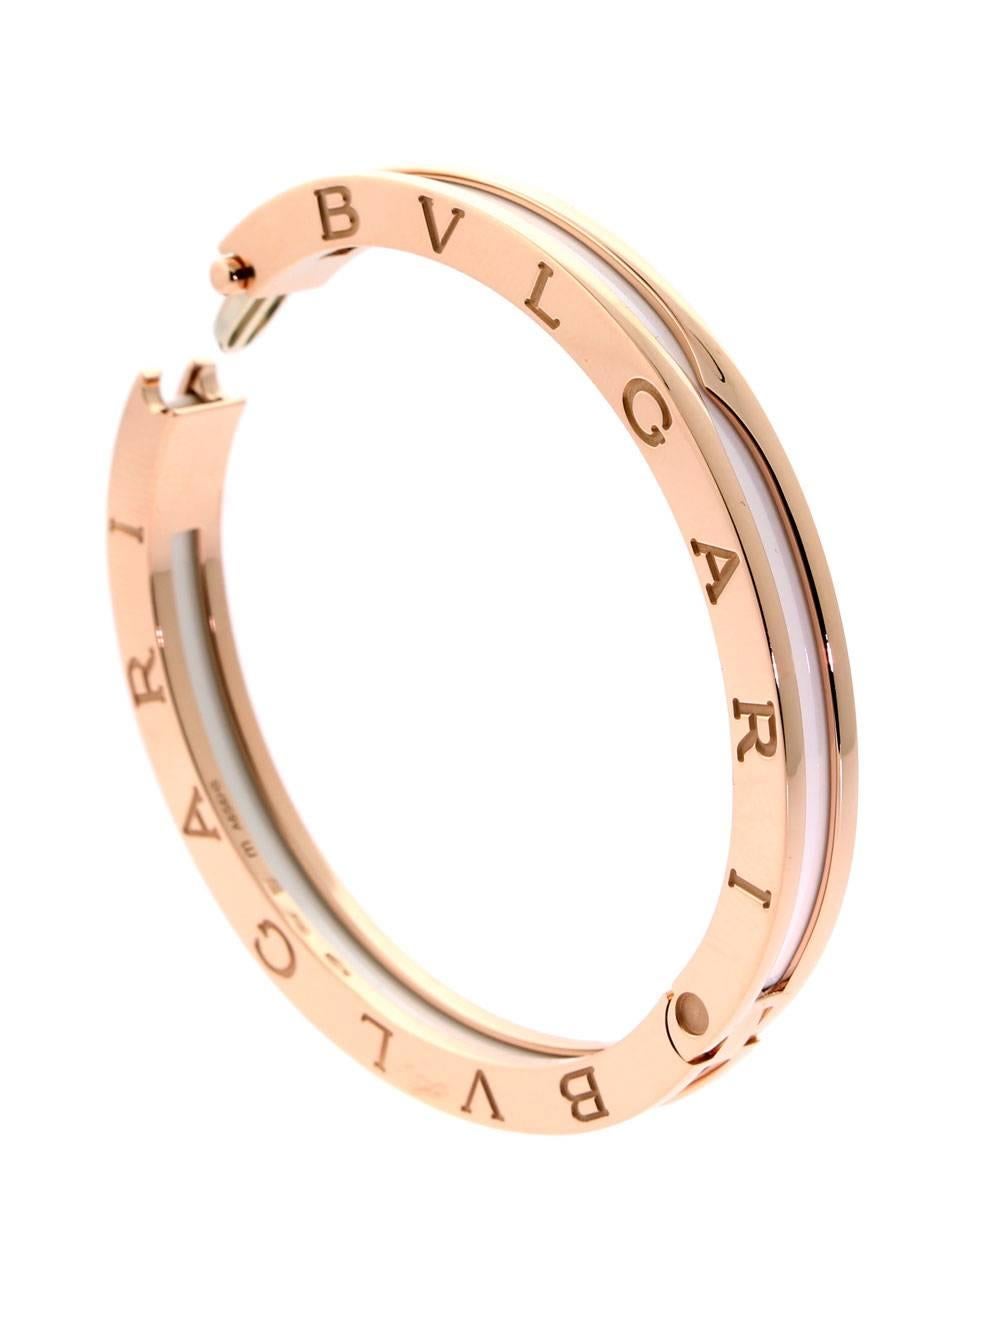 When your outfit needs a subtle accessory to make it pop, consider wearing Bulgari’s Ceramic Rose Gold Bracelet. With this classic embellishment on your wrist, you’ll bring a touch a class to every apparel ensemble. The piece’s white ceramic center